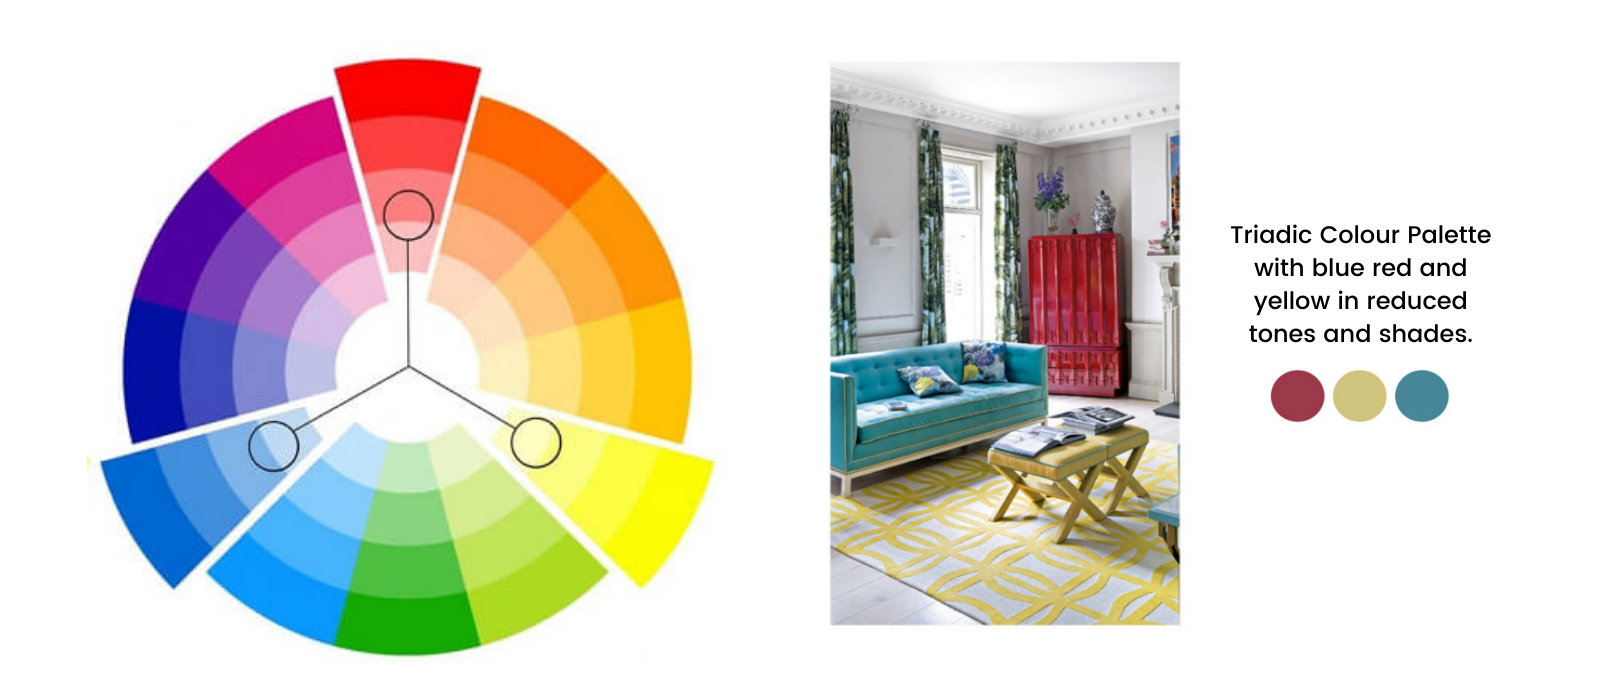 How to decorate your home with a Triadic Colour Palette.